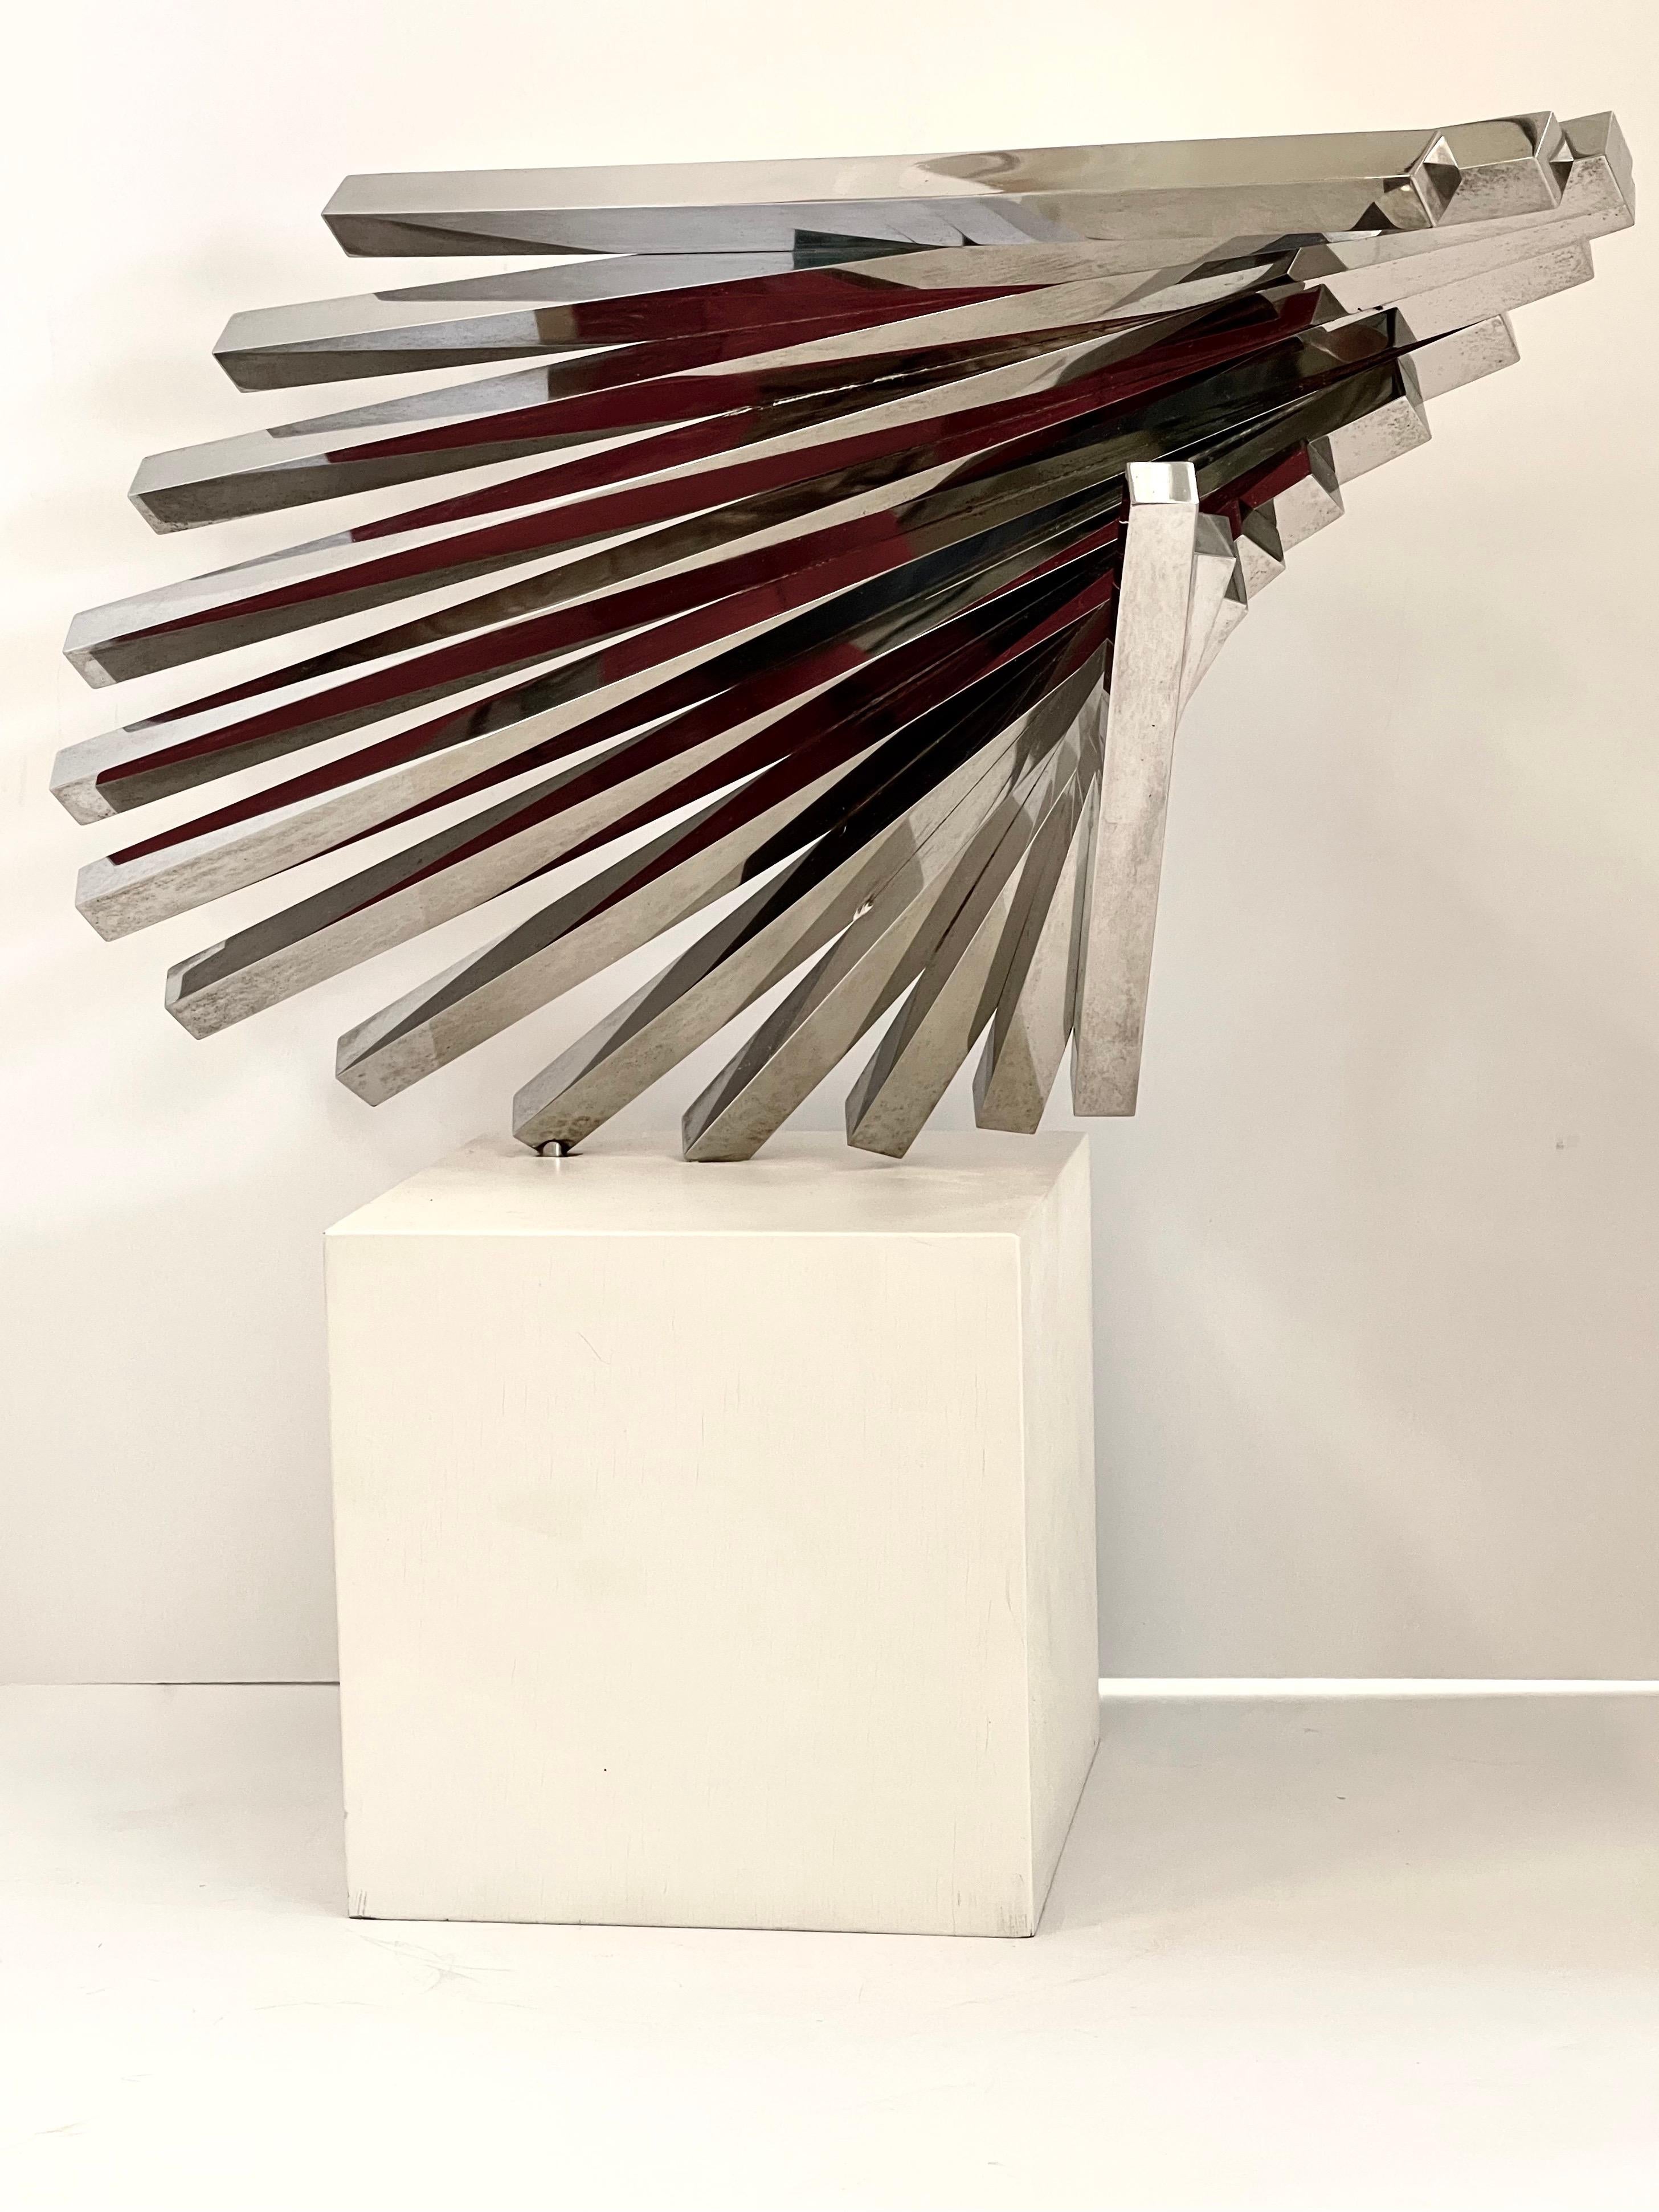 Steel sculpture by the noted artist David Lee Brown. It is marked with his name and date 1973. Mounted on a wood painted white base. Great form and movement. The artist passed away in 2016 in Southhampton, Long Island. There is a monumental example